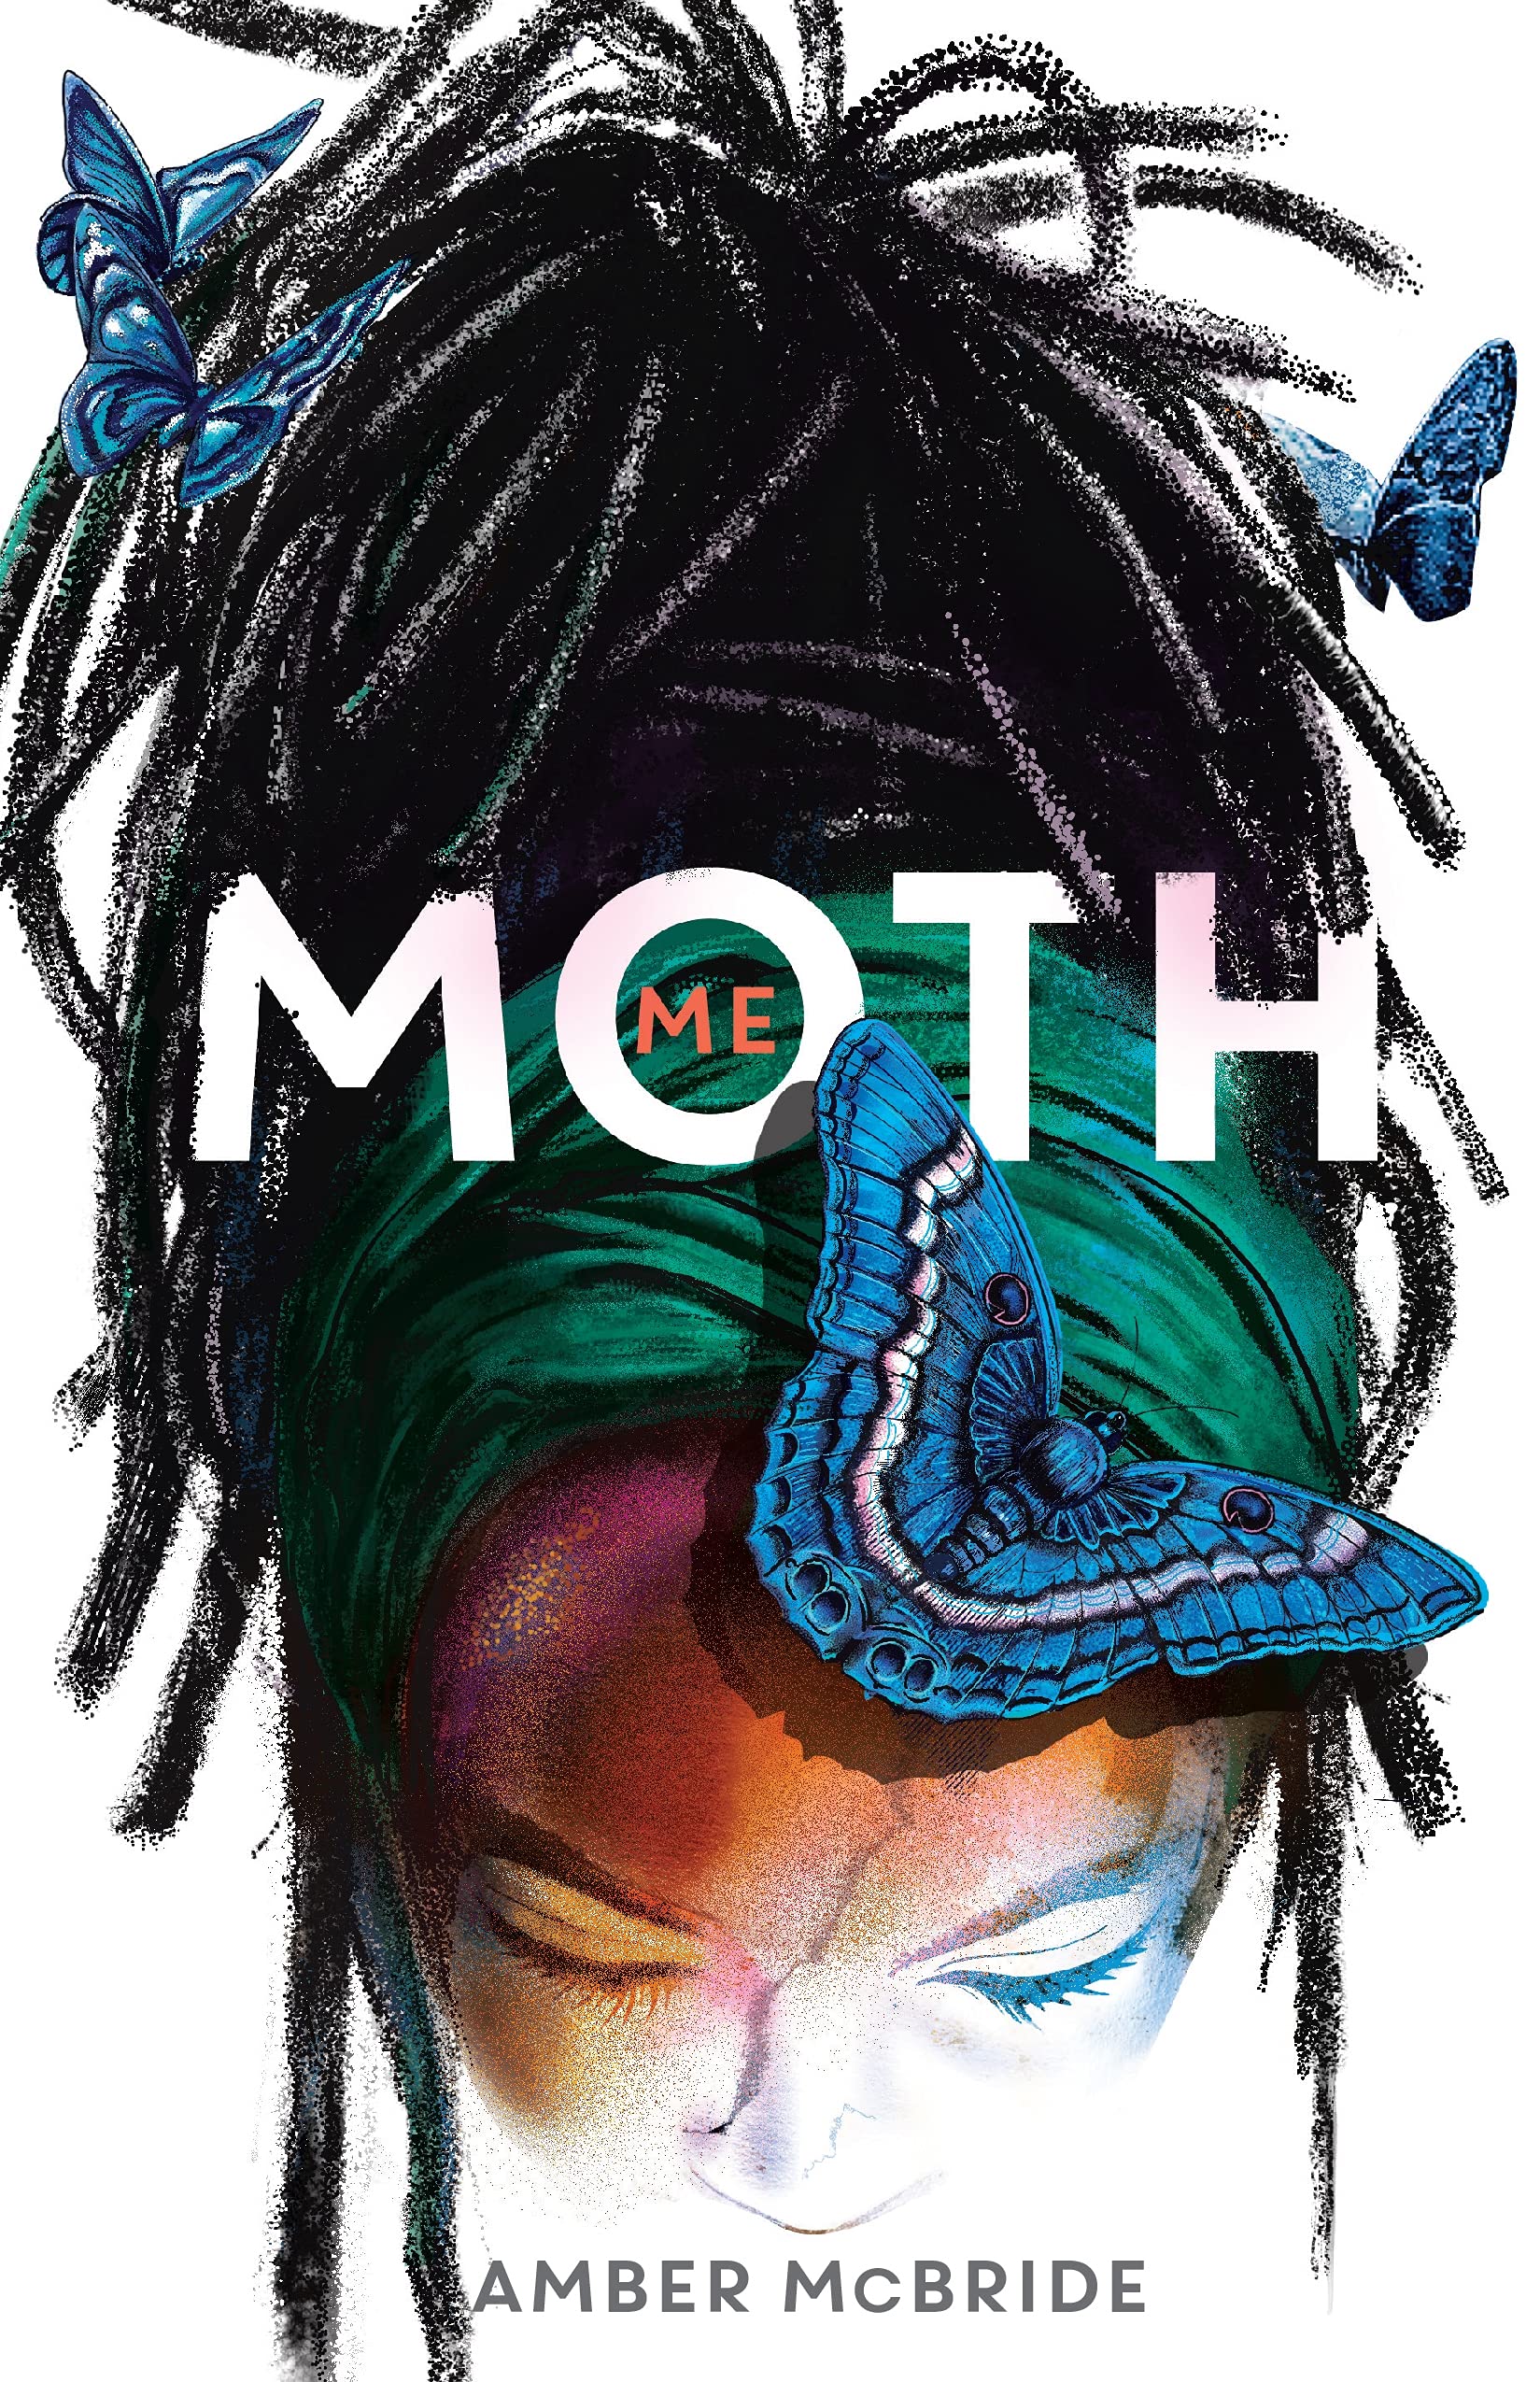 Cover image for "Me (Moth)"